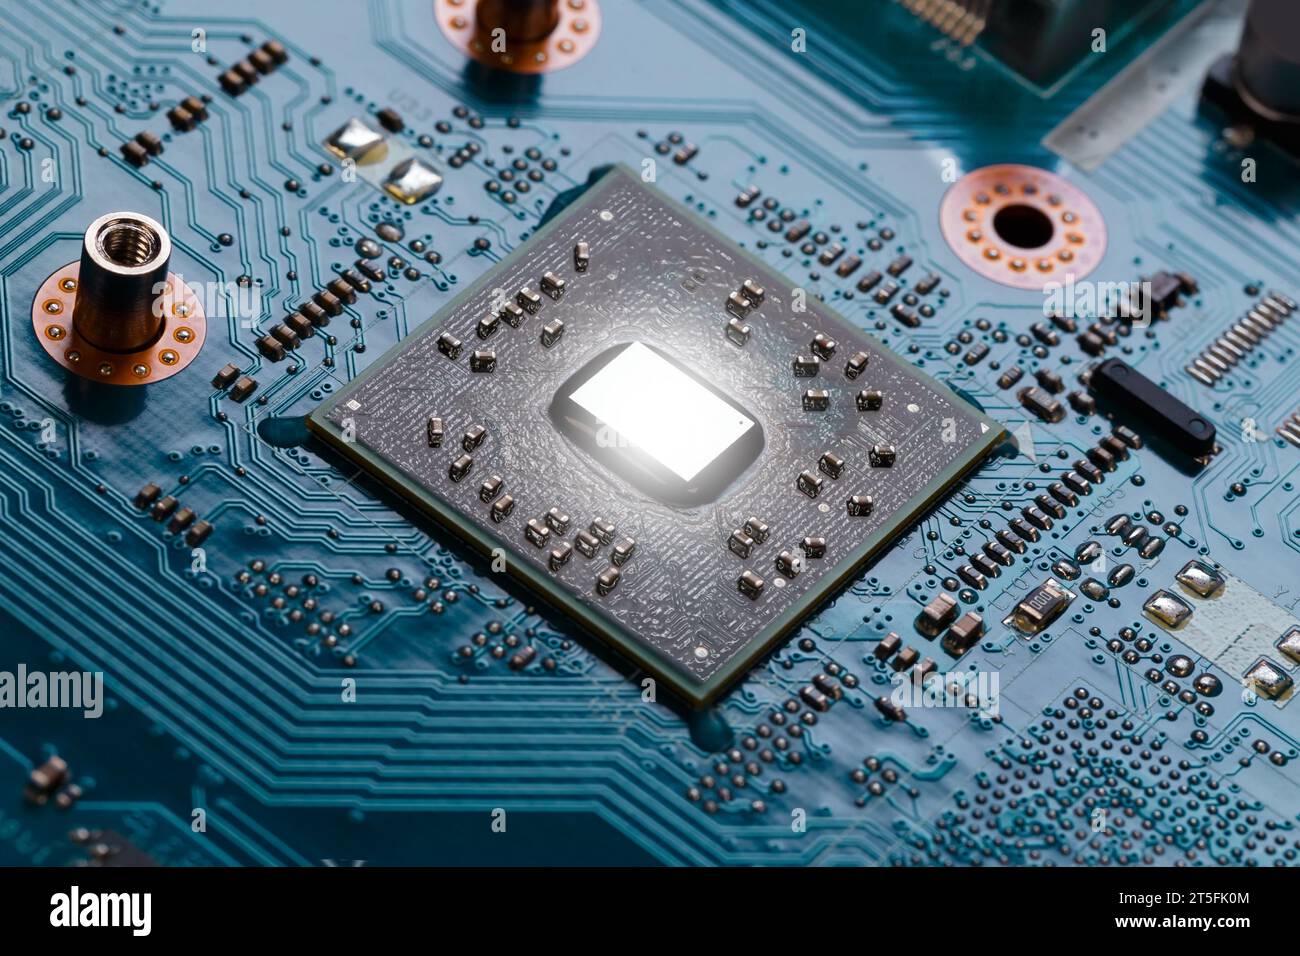 A mobile CPU with a removed cooling radiator on a laptop motherboard. Macro photography Stock Photo